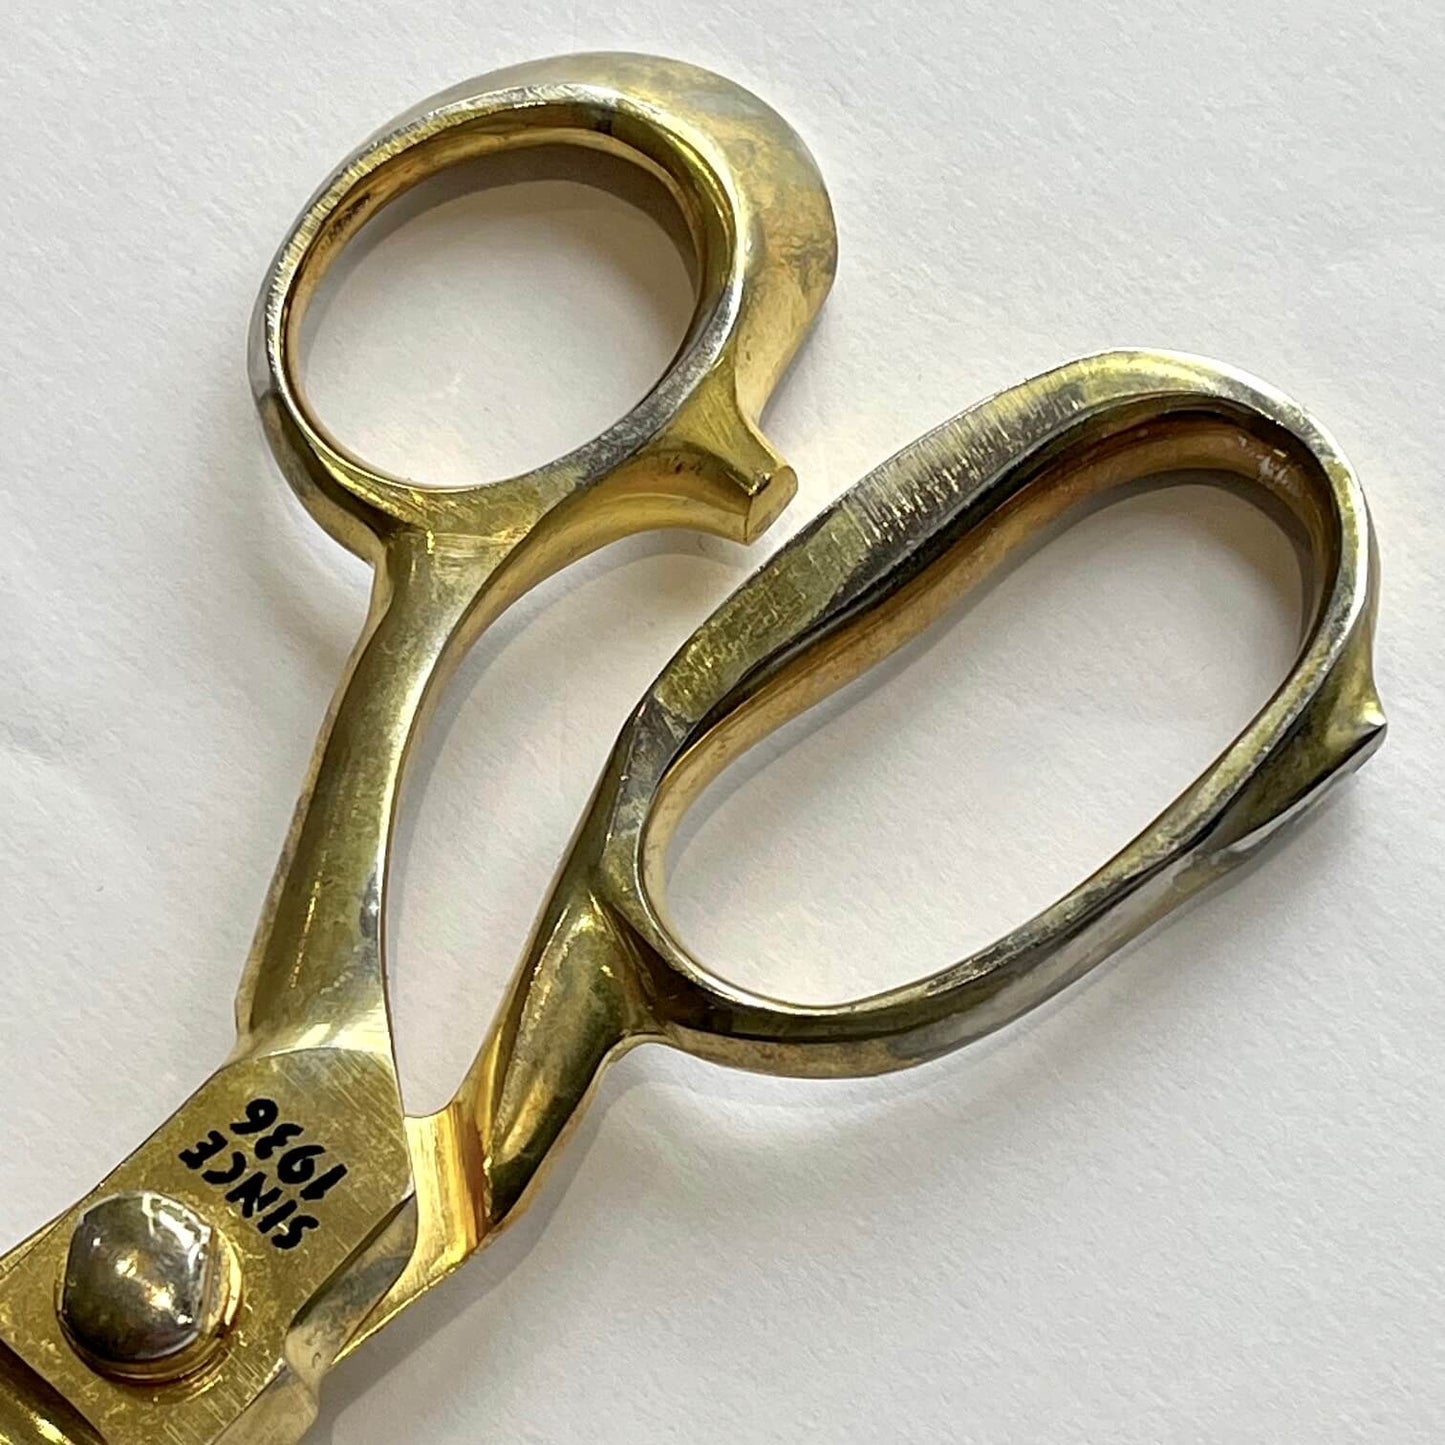 Gold Tailor's Shears - 8"